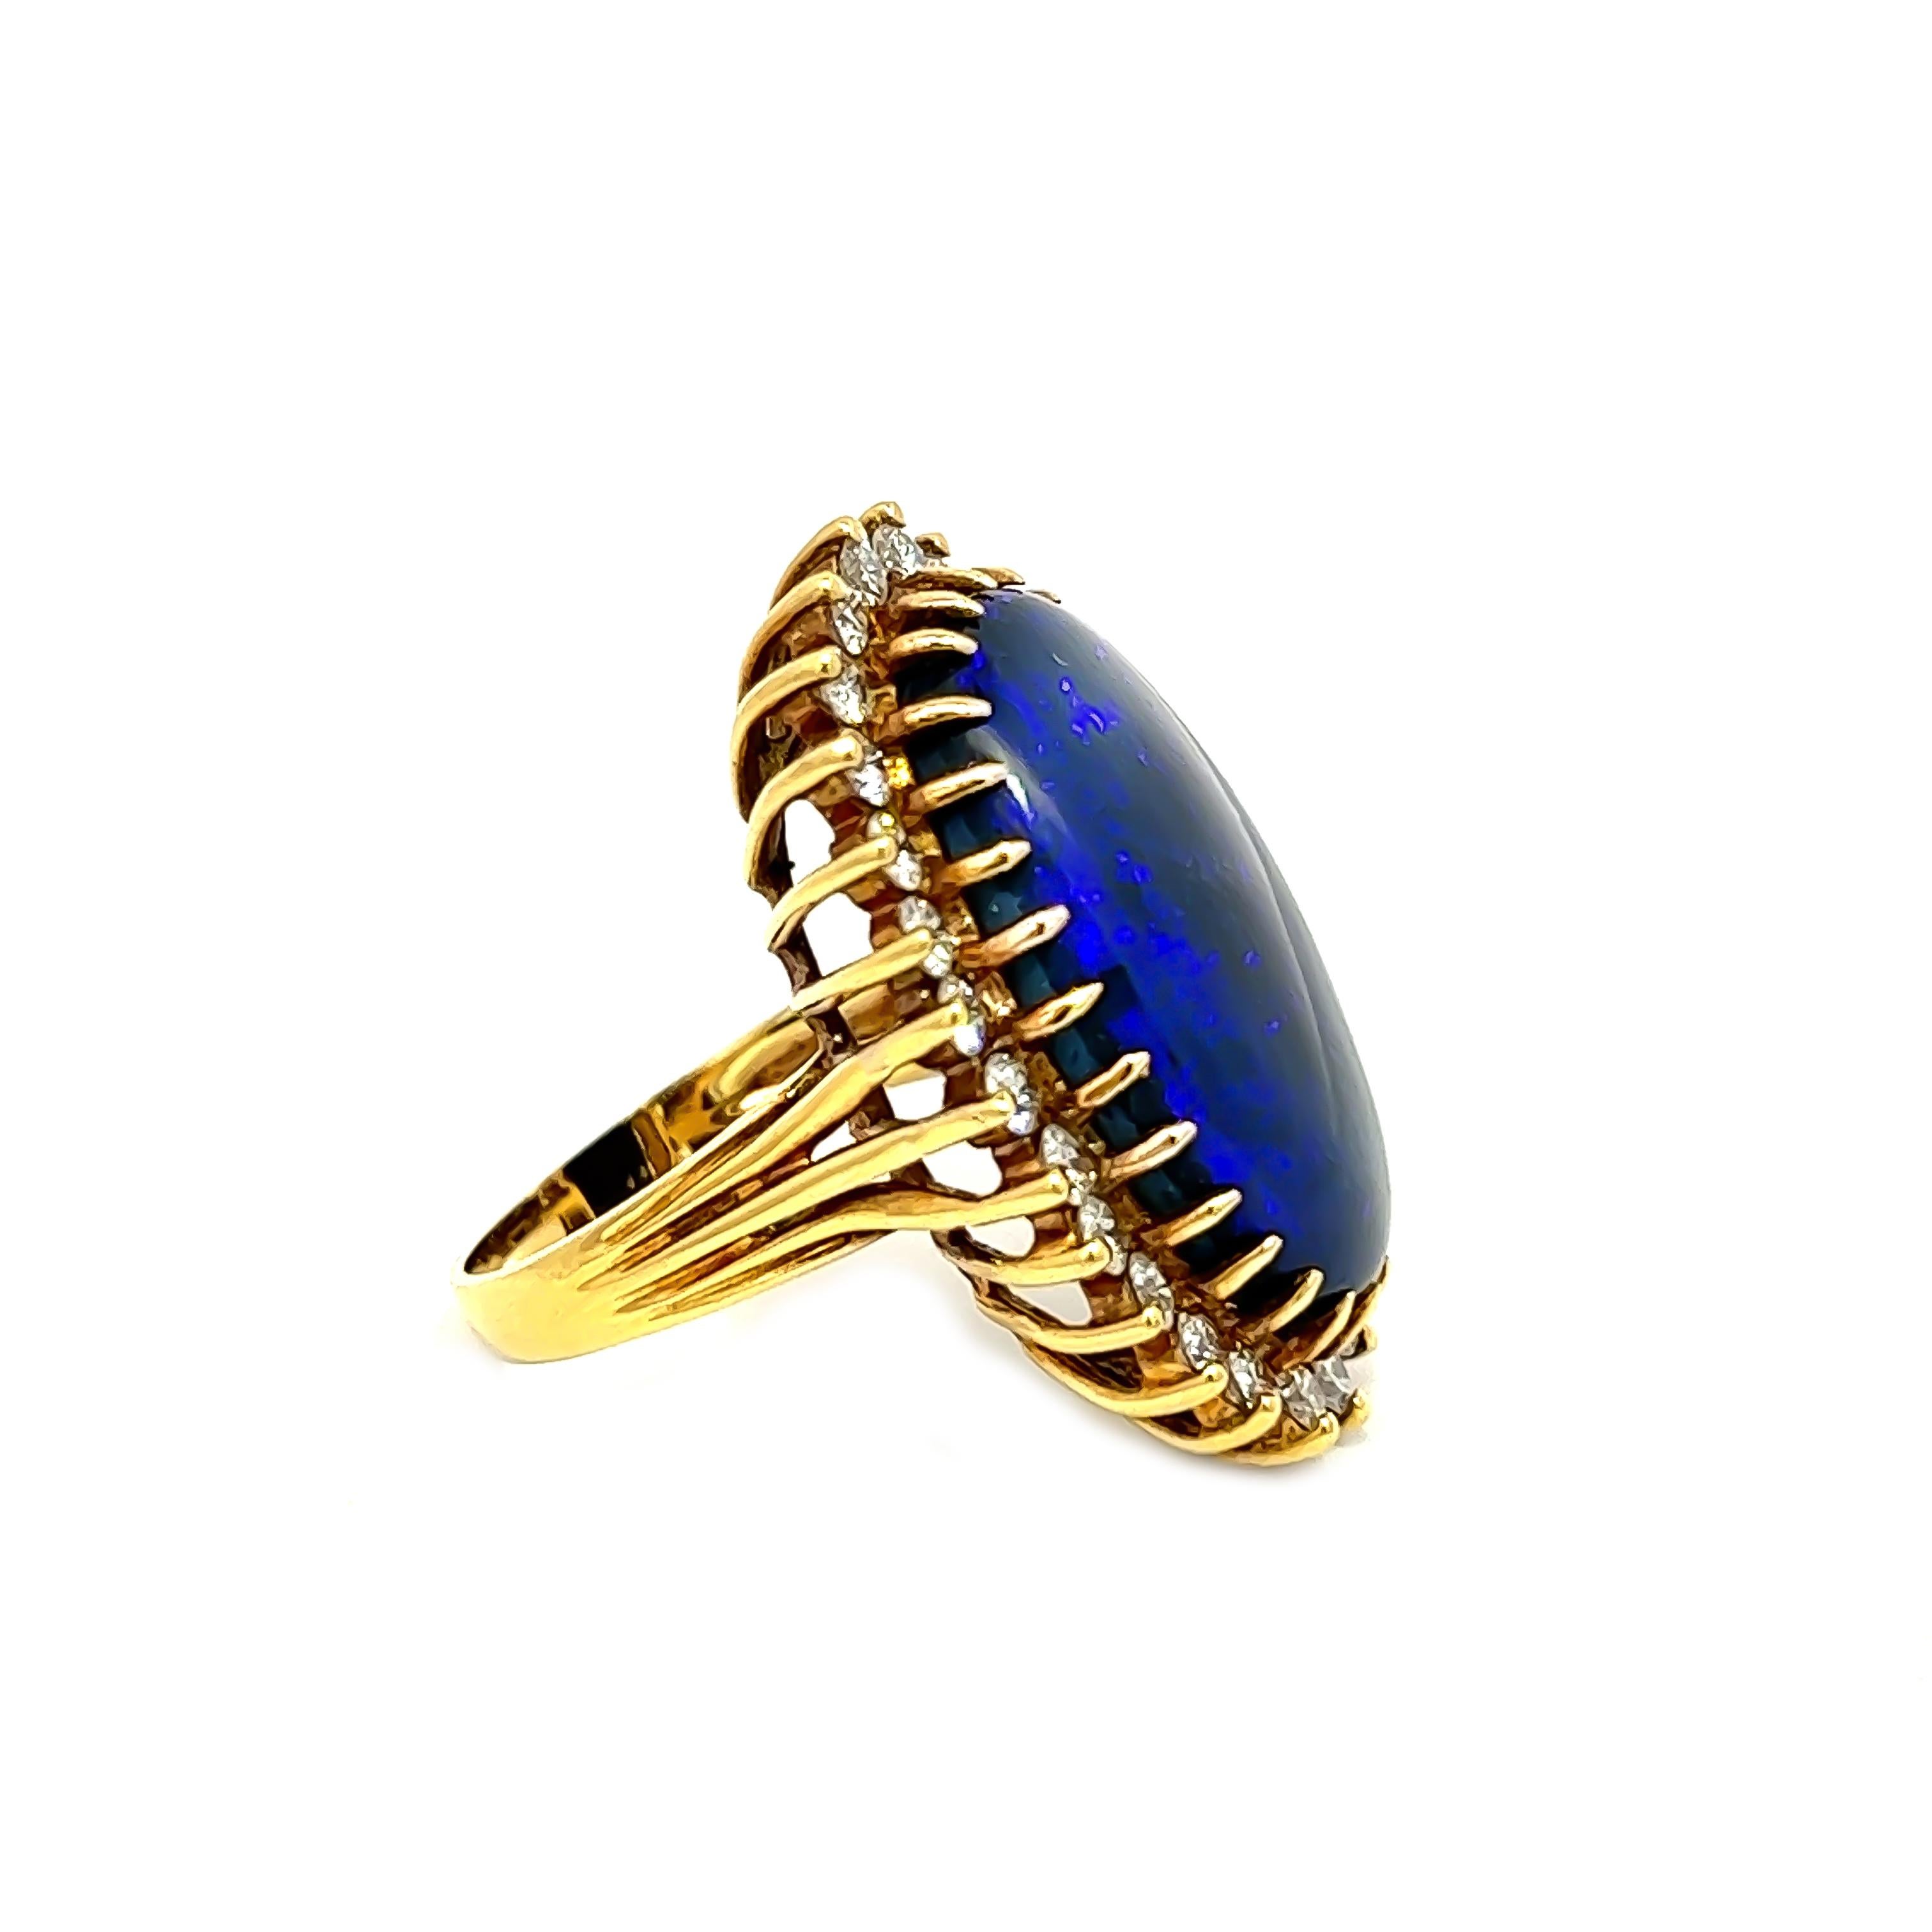 Aesthetic Movement 11.80Grams Black Opal & Diamonds Ring, Set in 18K Yellow Gold For Sale